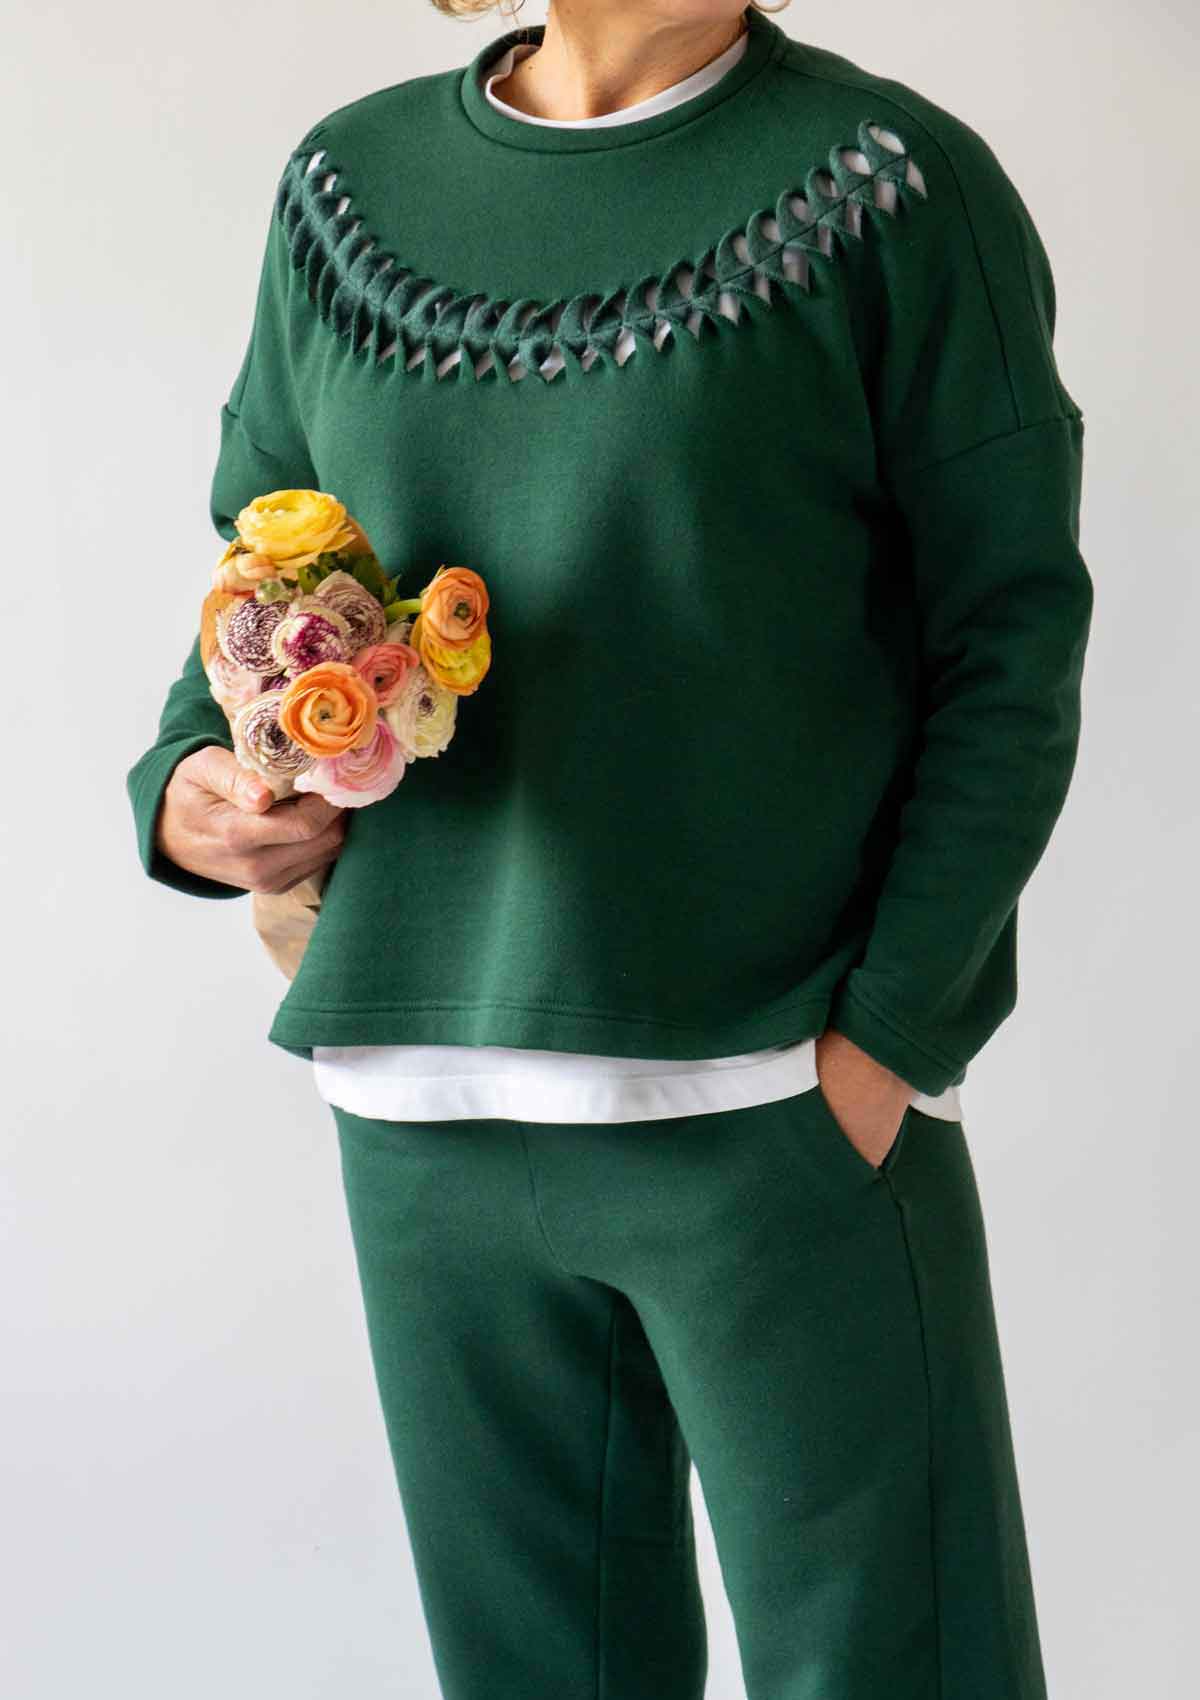 1.	Close up of a woman wearing the Asmuss Anni Sweatshirt in Trekking Green with the Cut Twist and Stitch detailing while holding a bunch of yellow, orange and pink flowers under her arm